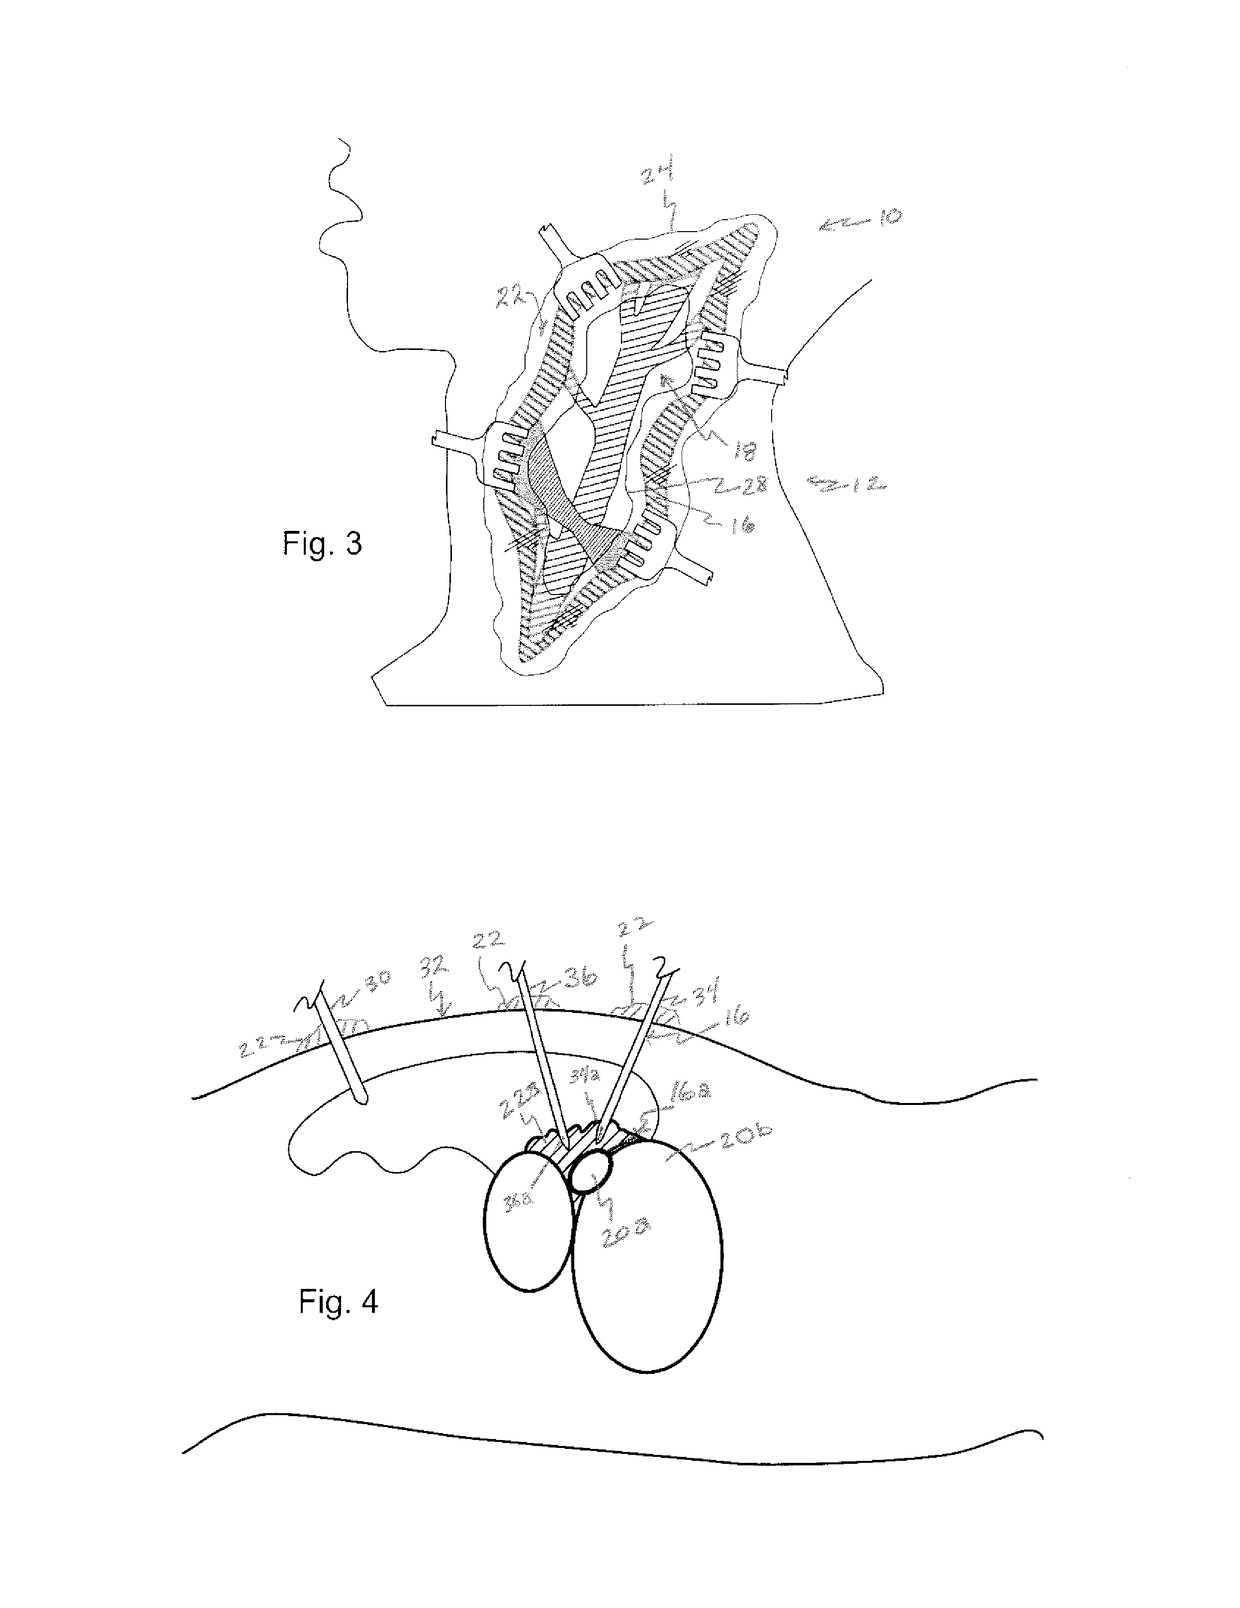 Expandable medical device and method of use